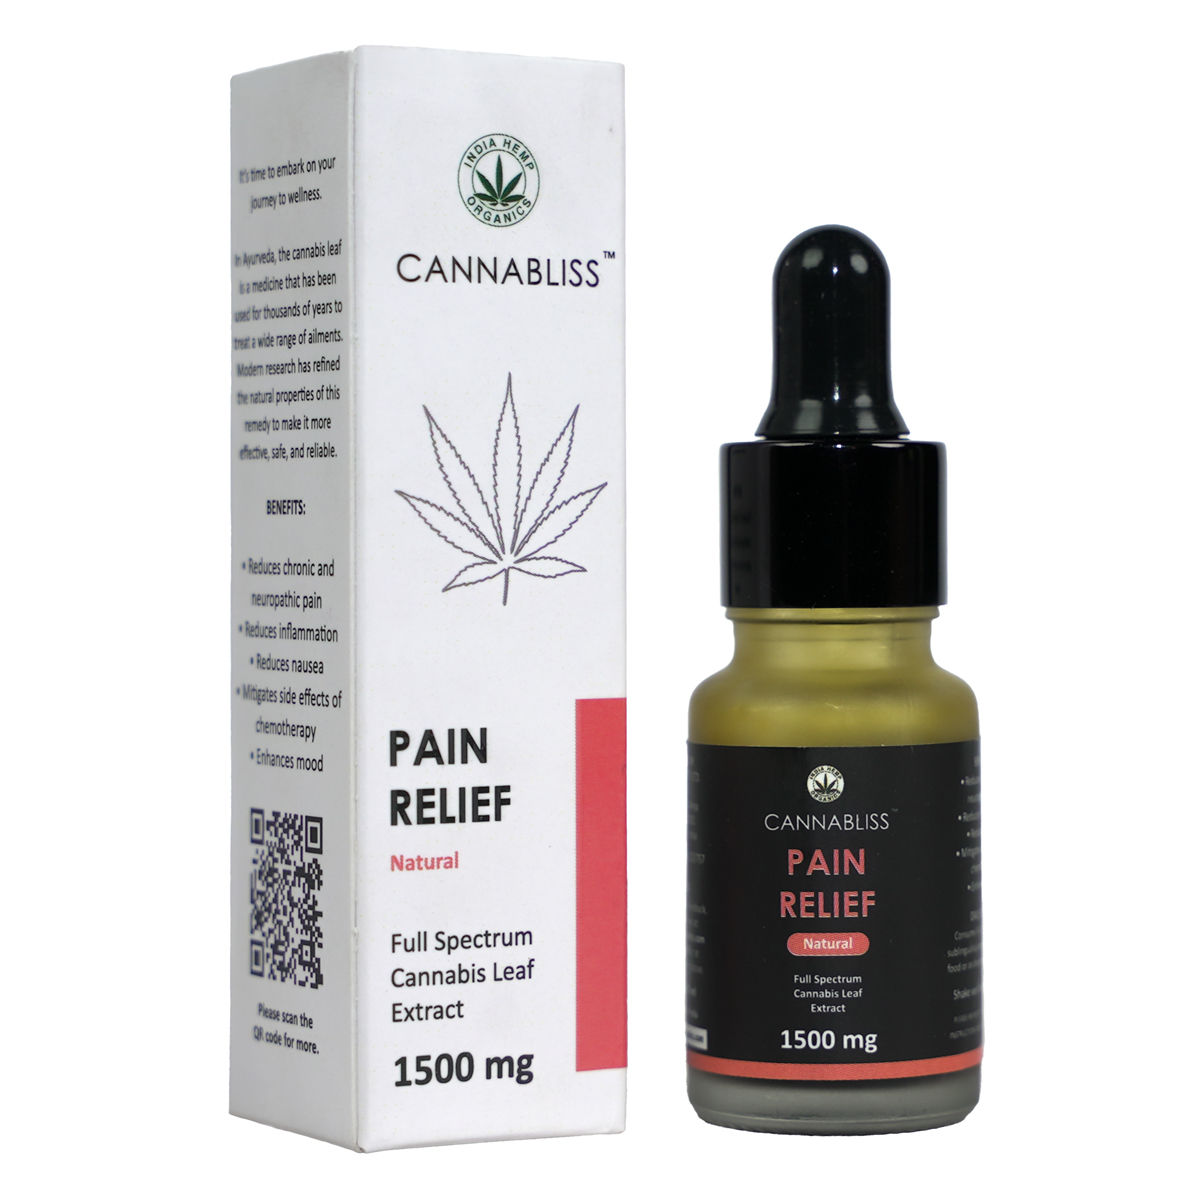 Buy Cannabliss Pain Relief Natural 1500 mg Oil, 10 ml Online